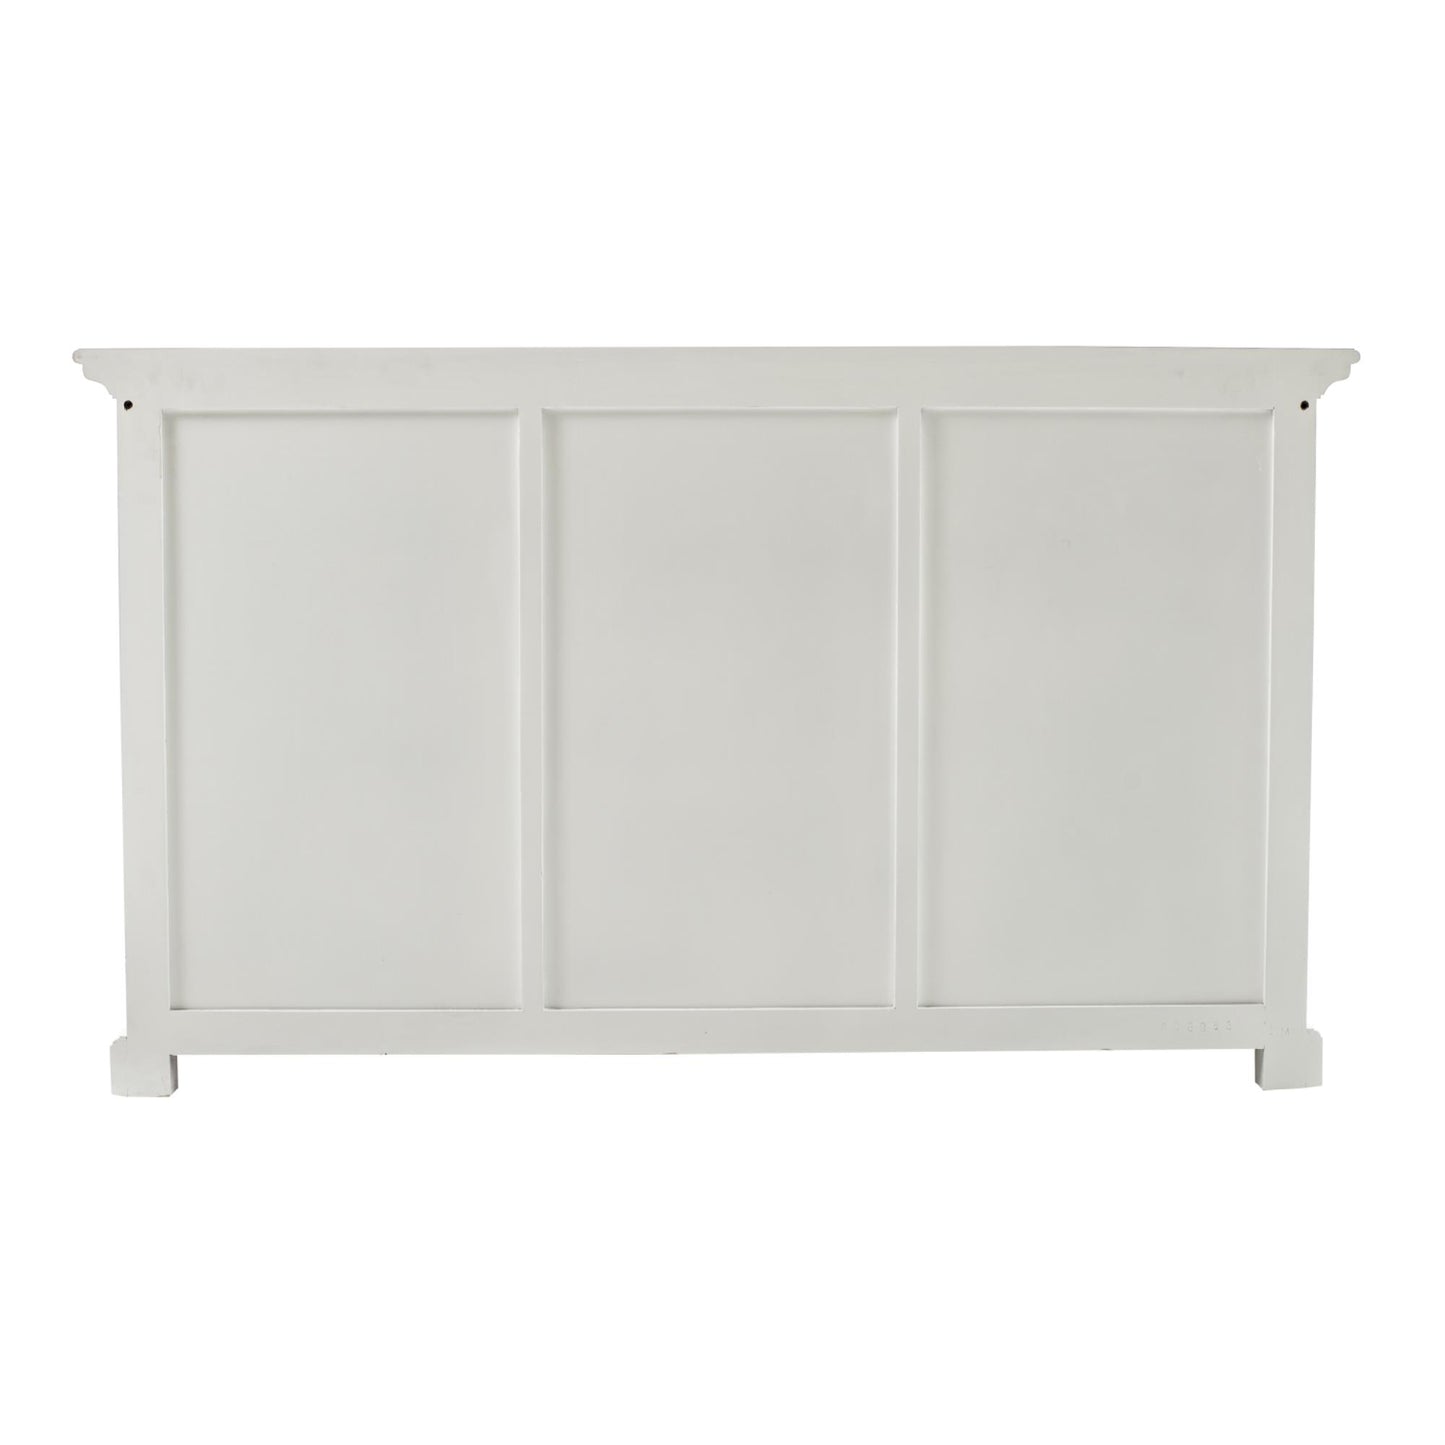 Provence collection by Nova Solo.  Classic Sideboard with 3 doors CasaFenix